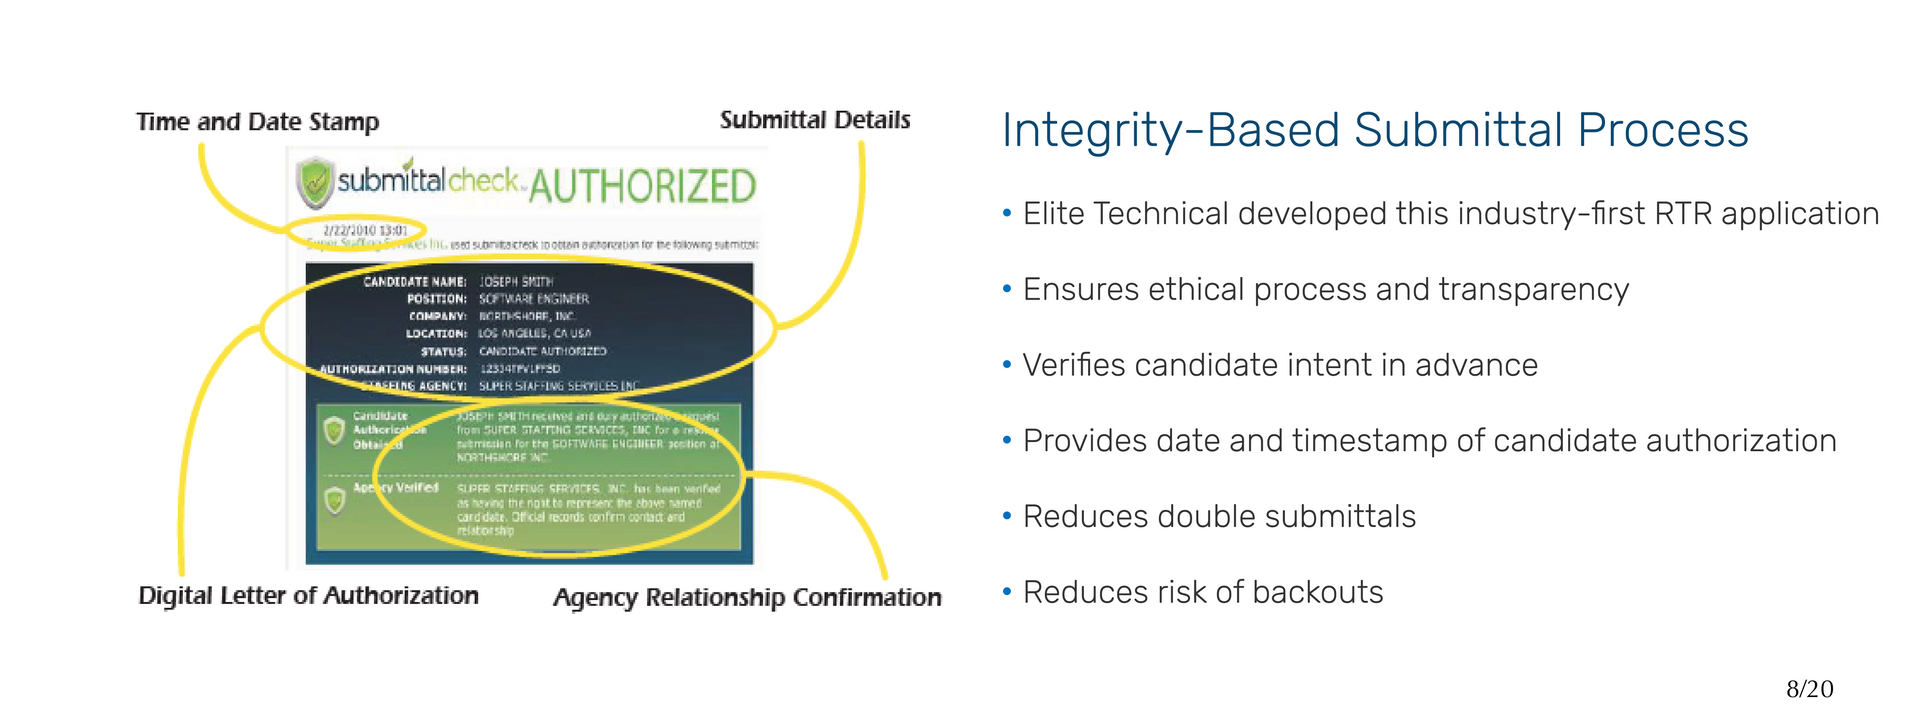 Elite Technical's Integrity-Based Submittal Process